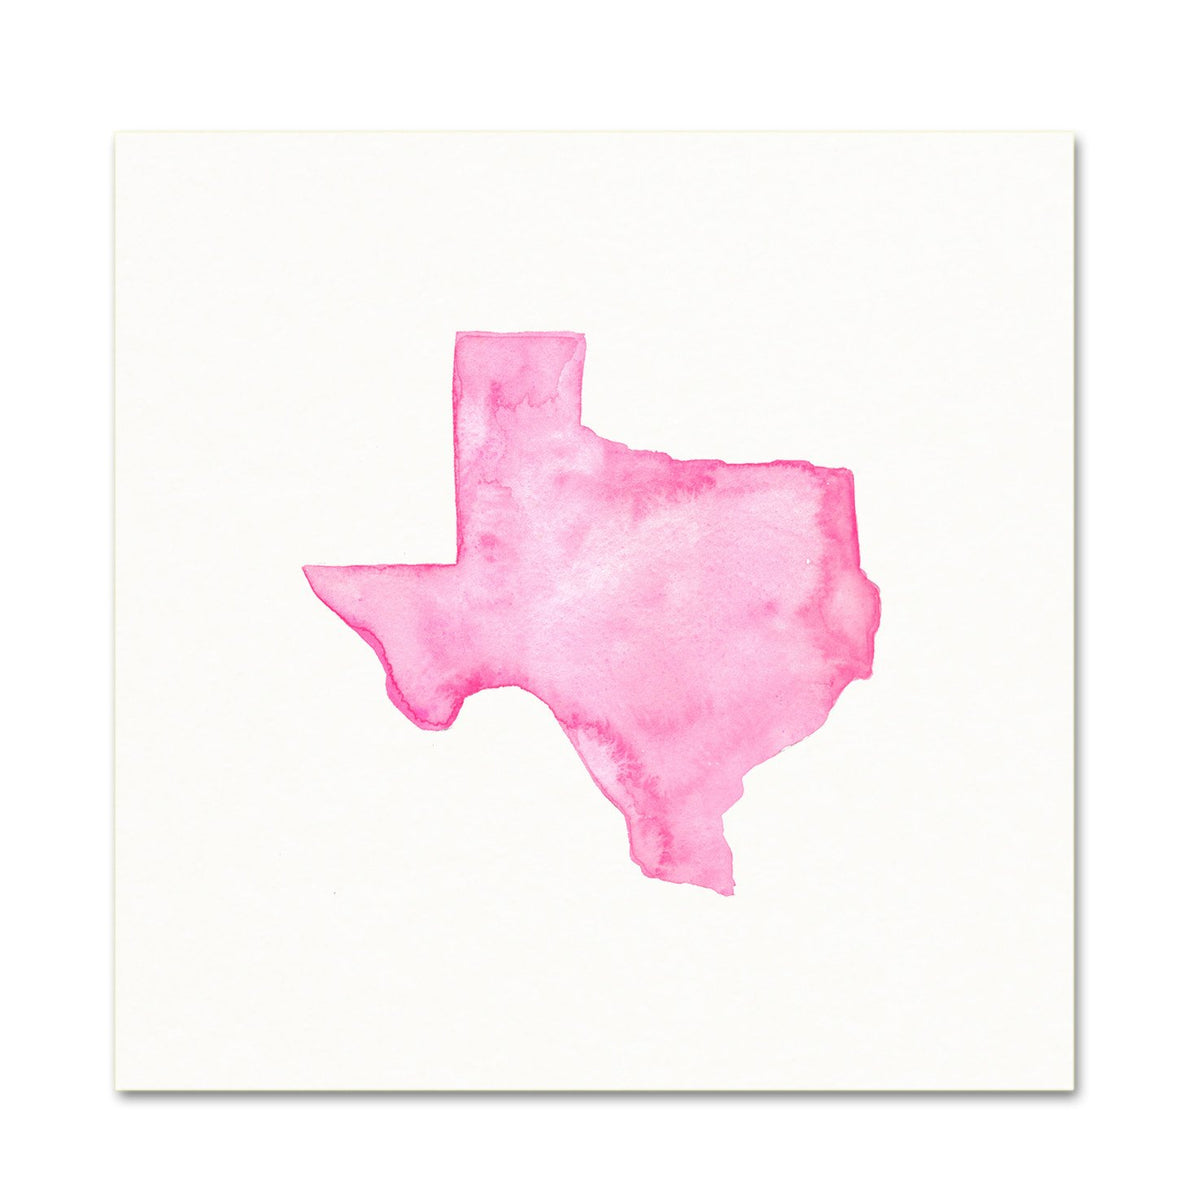 Dorm Art. State Paintings. Watercolor painting of Texas